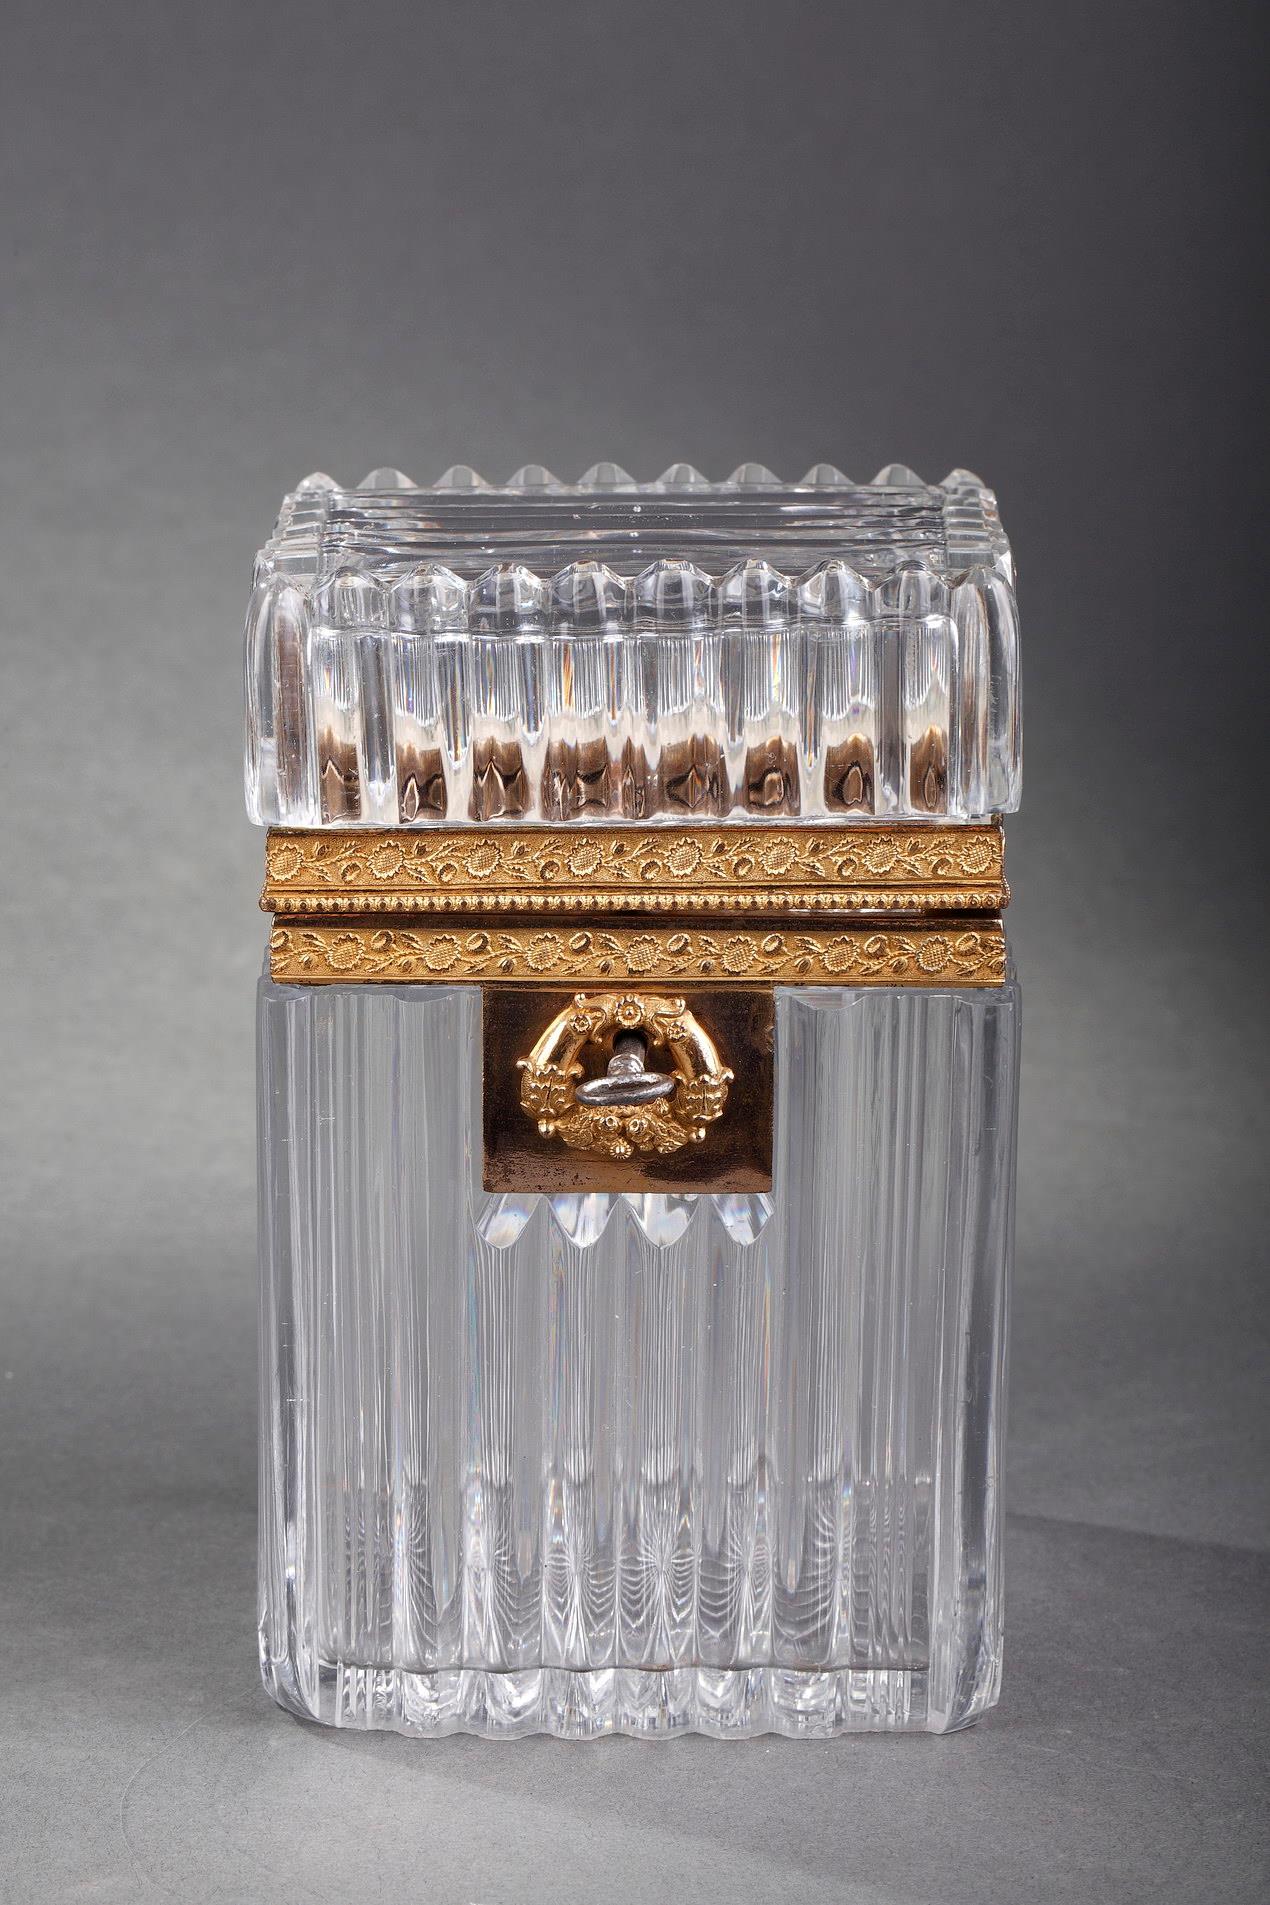  cut-crystal and  ormolu  casket or  jewellery box from the 19th century,Charles X